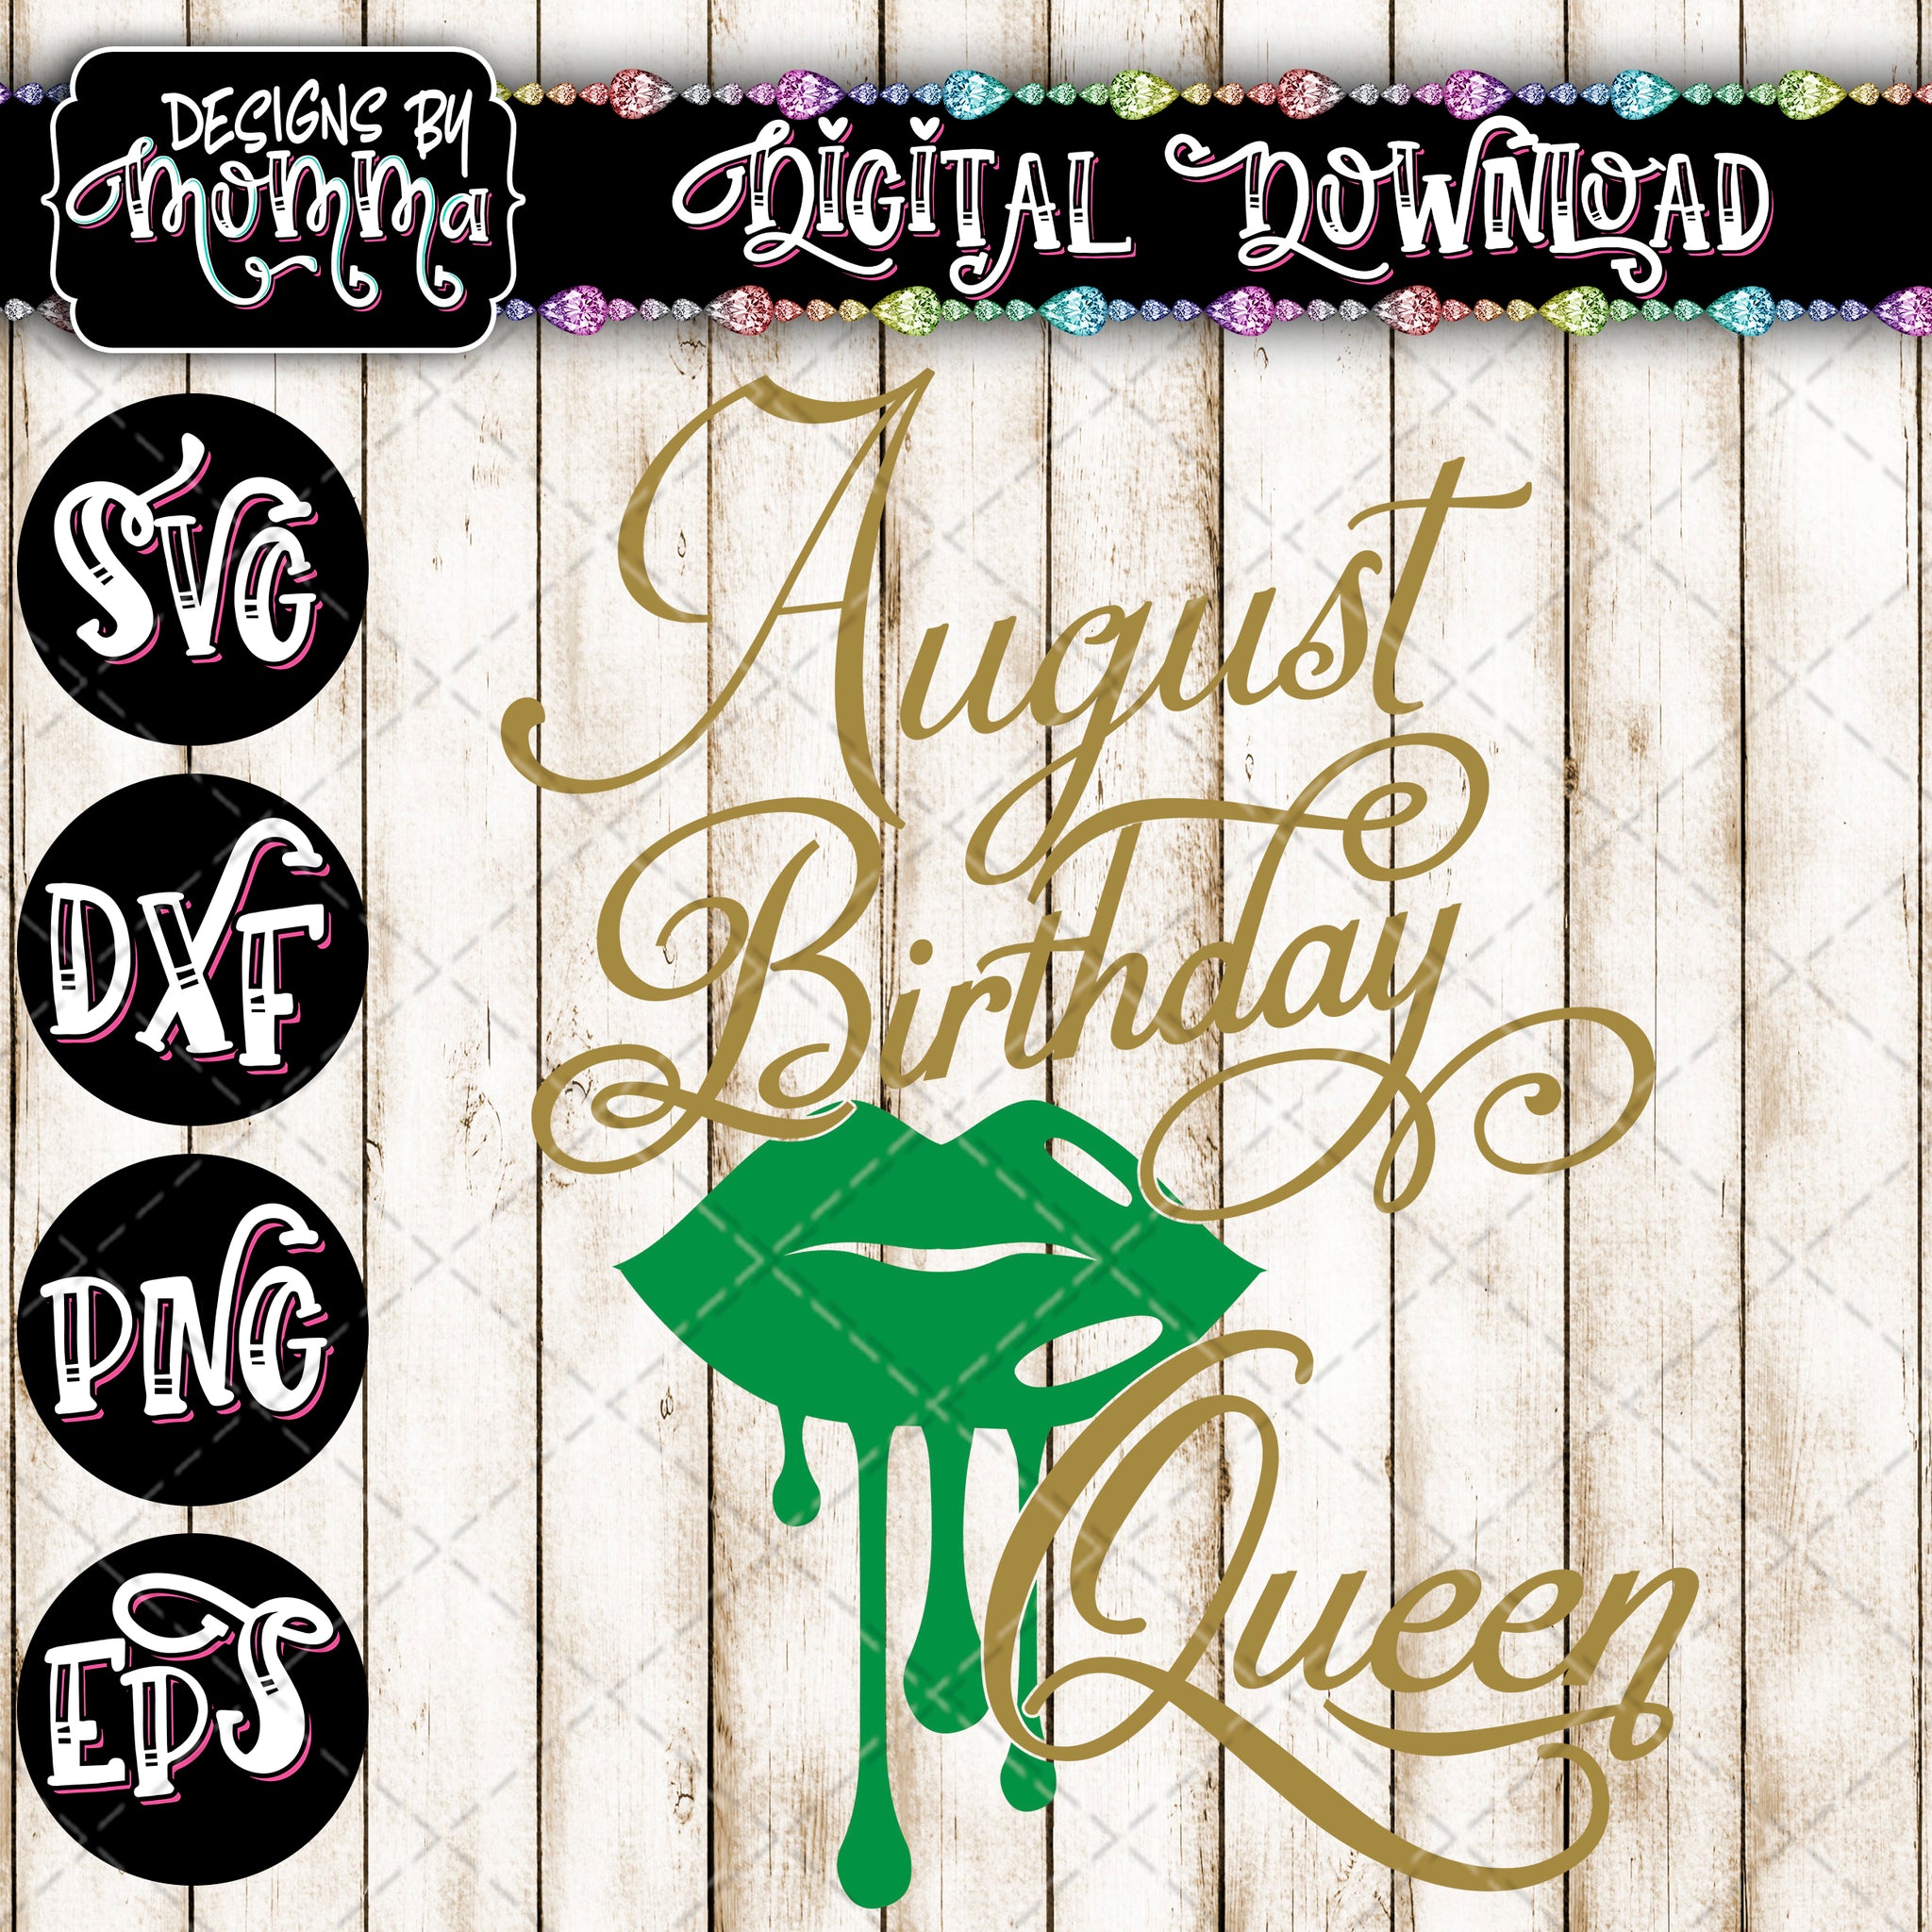 Download August Birthday Queen Lips Svg Dxf Eps Png Designs By Momma